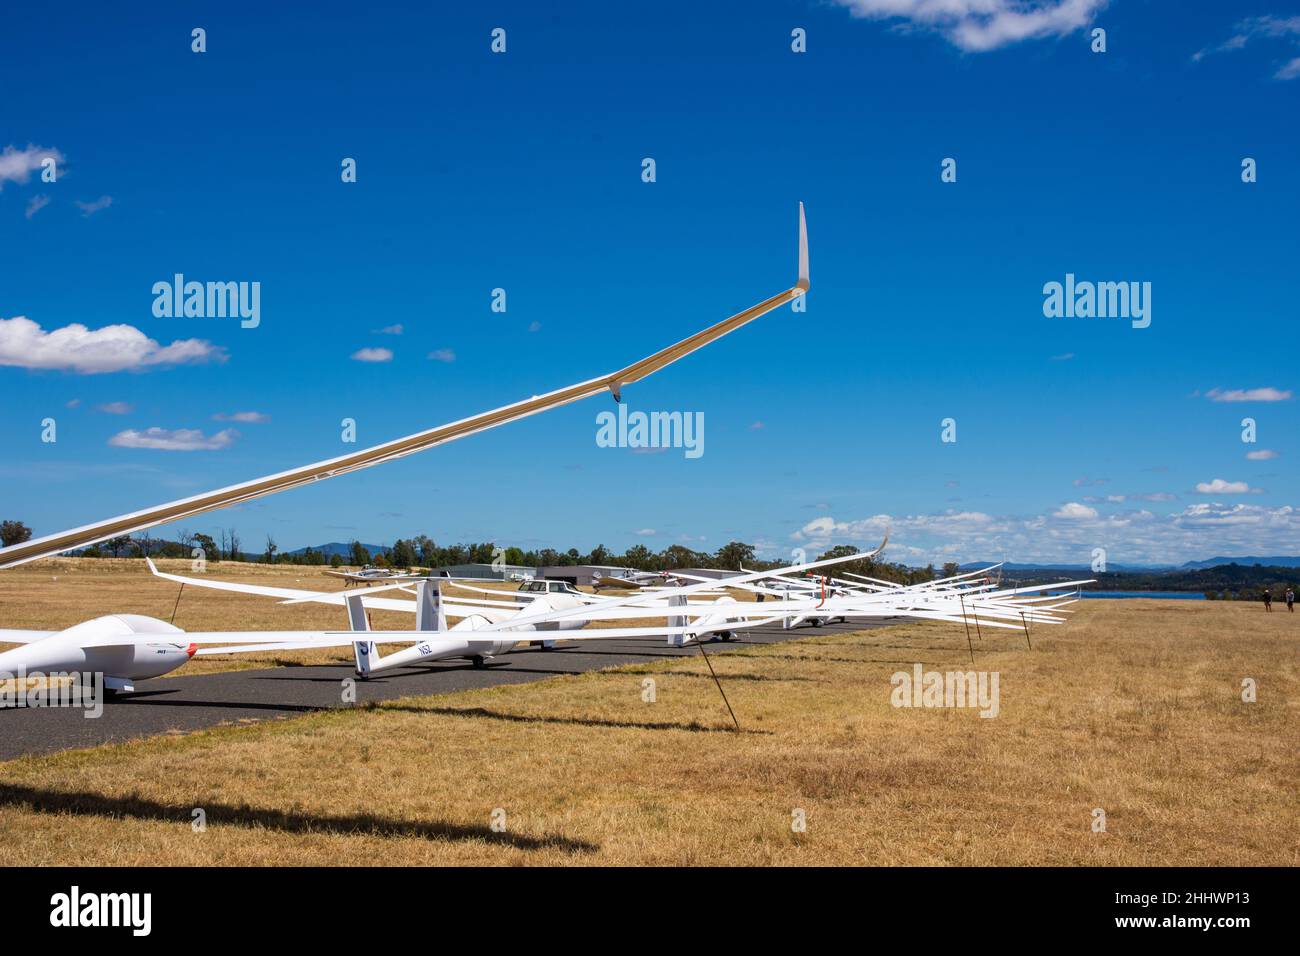 Sailplanes in a queue waiting for tug planes to tow them for lift off at Lake Keepit Soaring Club airfield ,Gunnedah Australia. Stock Photo